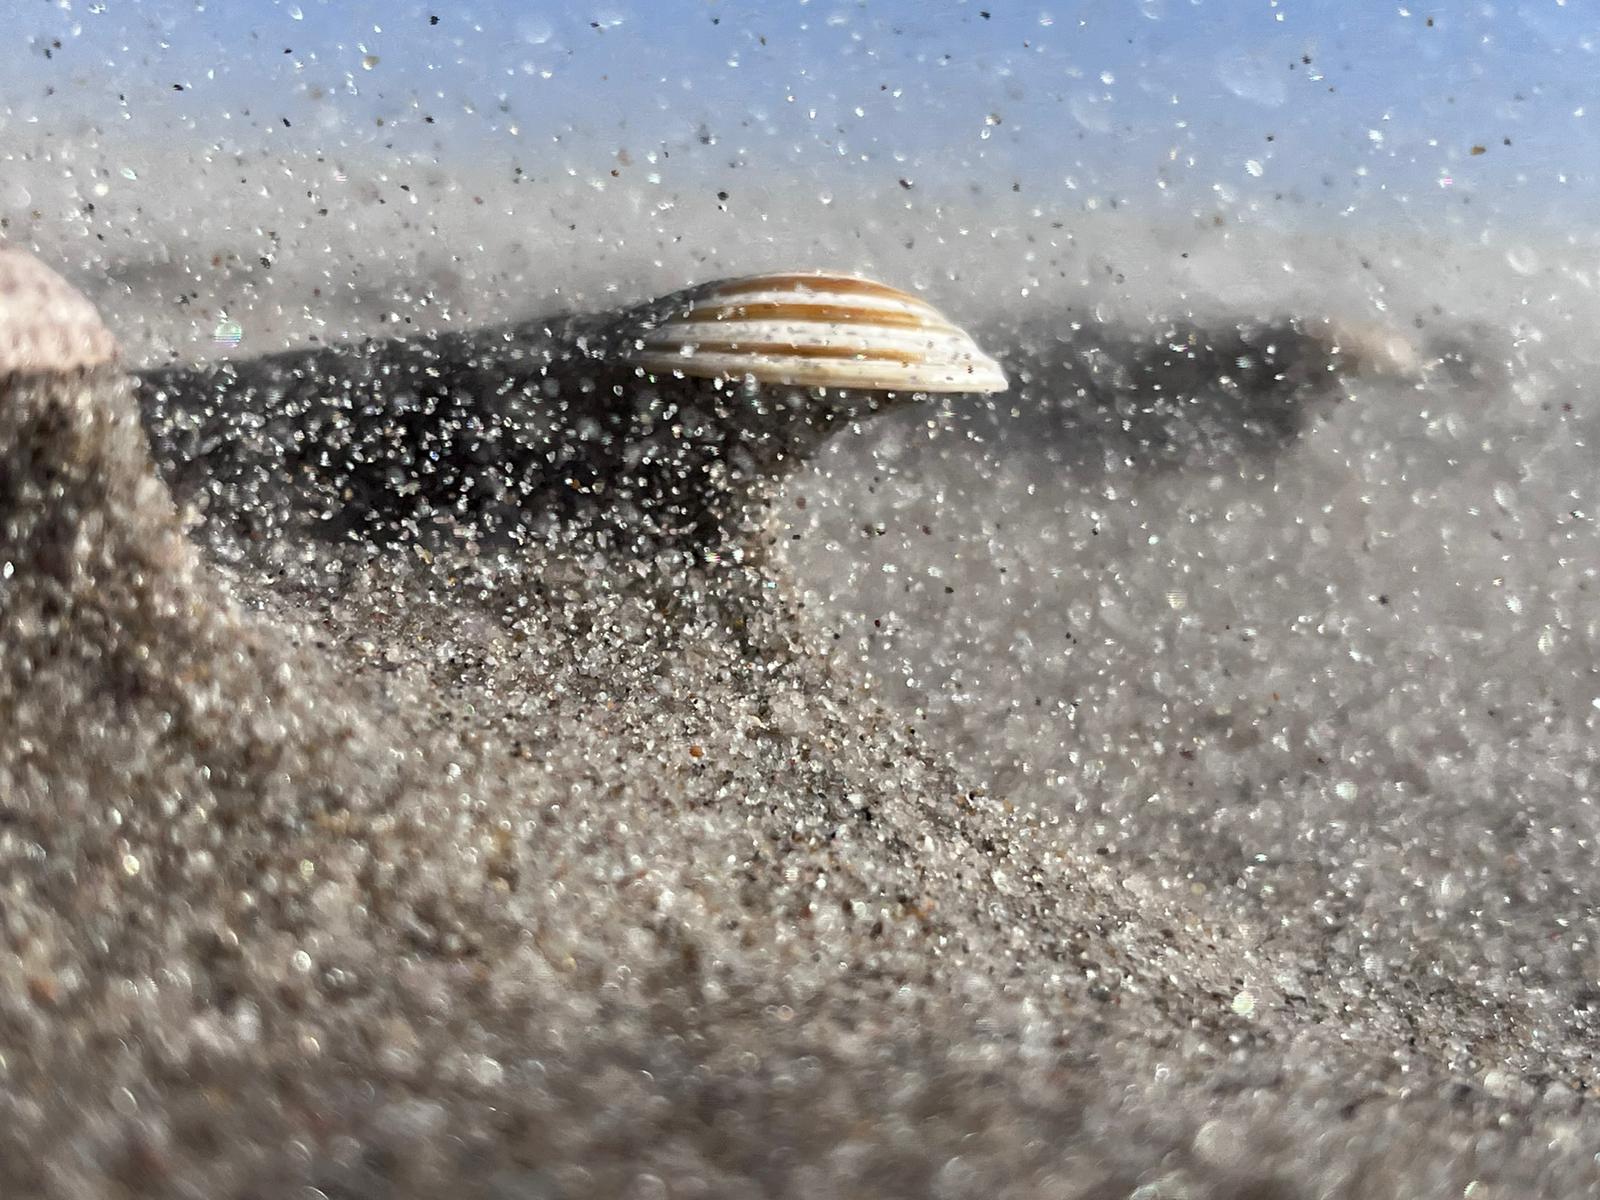 Shell in a sandstorm